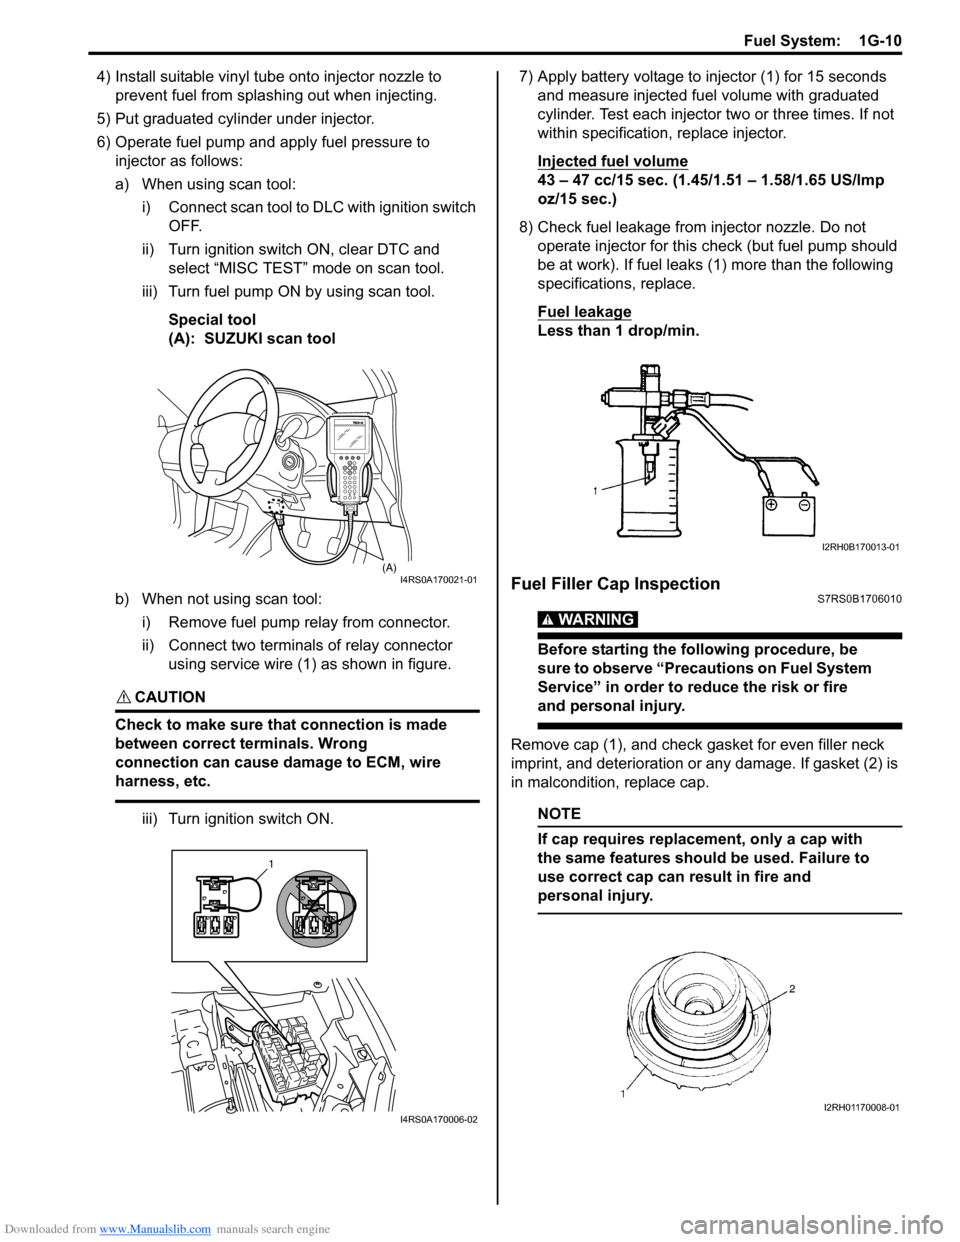 SUZUKI SWIFT 2004 2.G Service Workshop Manual Downloaded from www.Manualslib.com manuals search engine Fuel System:  1G-10
4) Install suitable vinyl tube onto injector nozzle to 
prevent fuel from splashing out when injecting.
5) Put graduated cy